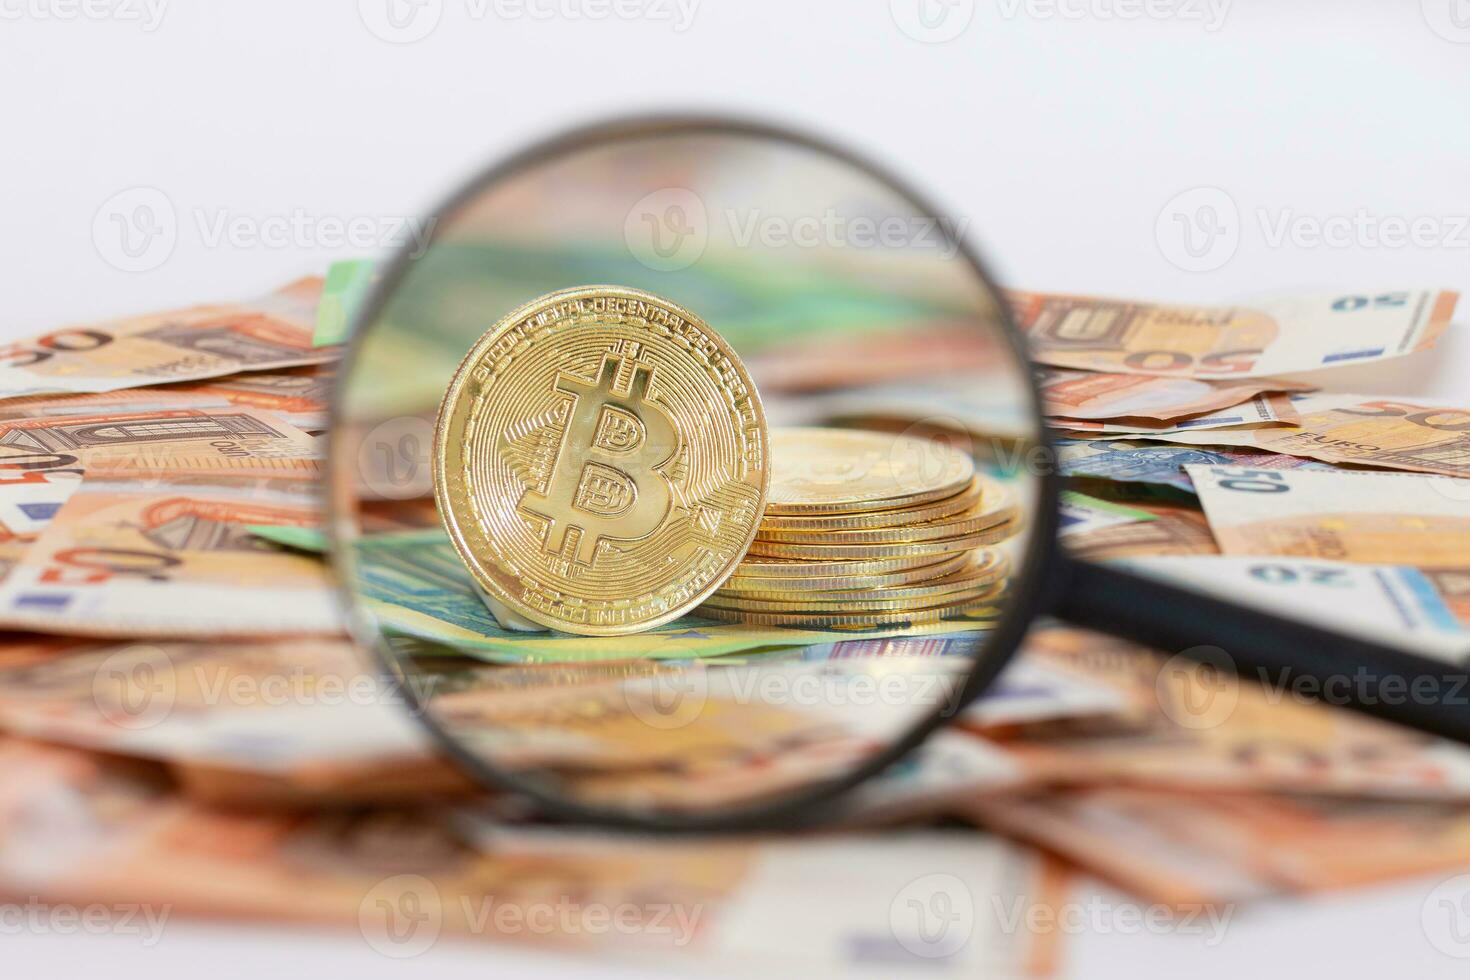 A Stack of Bitcoin Coins Visible Through a Magnifying Glass on the 50-Euro Banknotes. Euro Currency and Crypto Currency. Orange Paper Money. A Lot of Fifty-Euro Bills. Anonymous Payments Concept photo